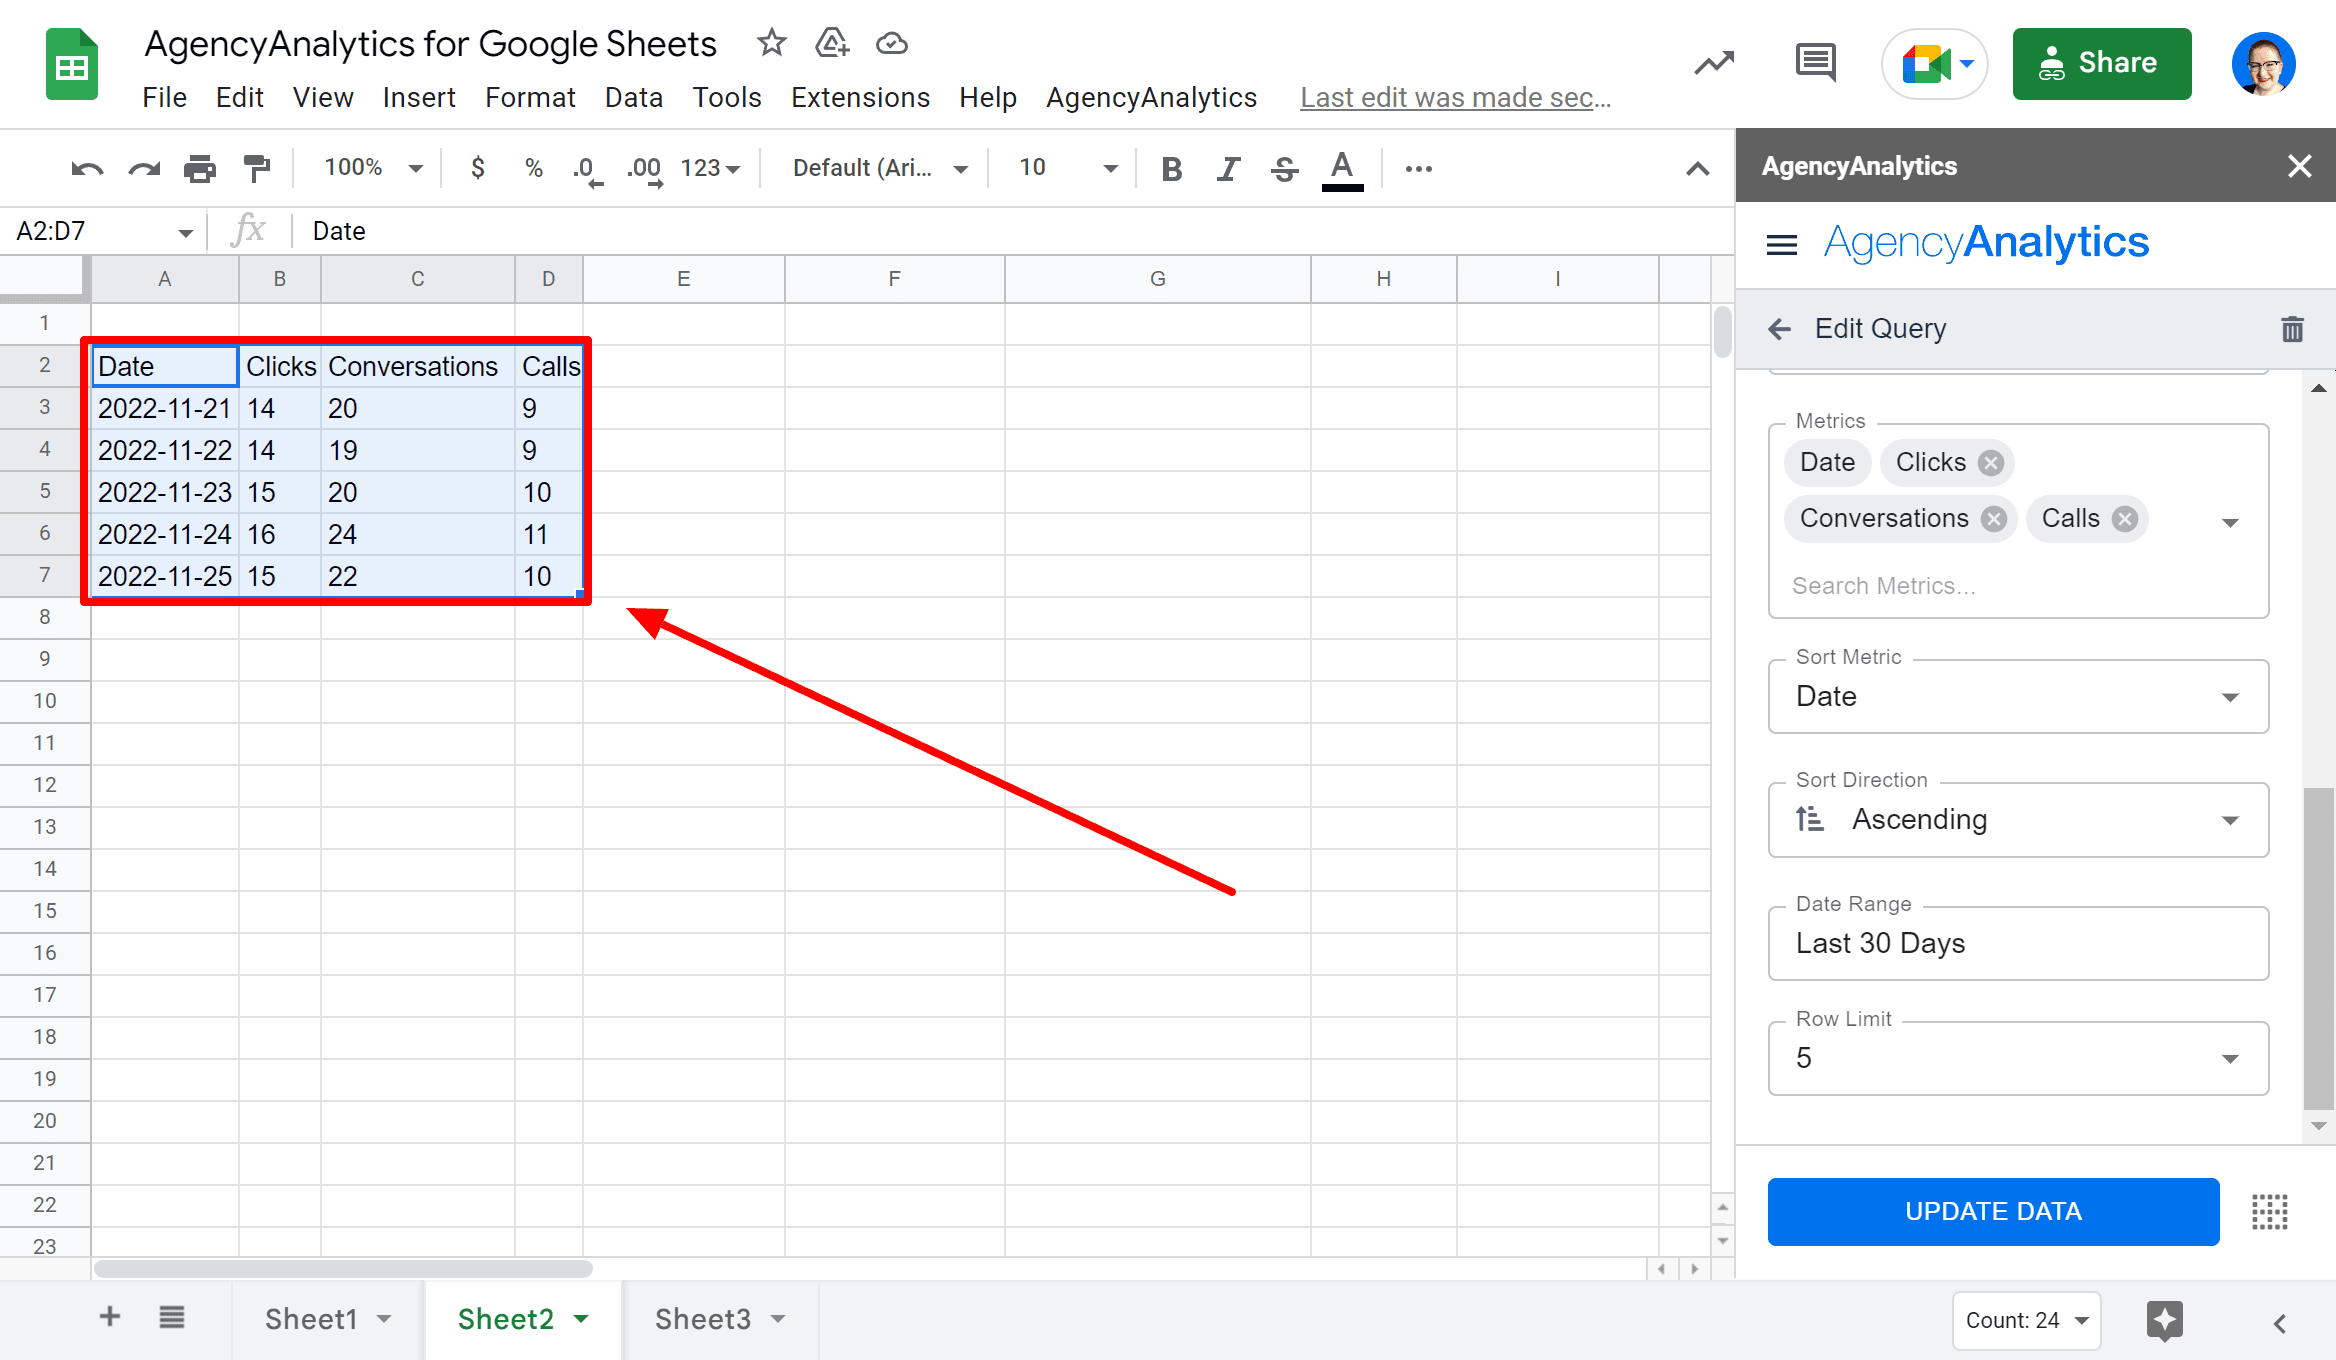 An image showing how query data gets added to AgencyAnalytics for Google Sheets